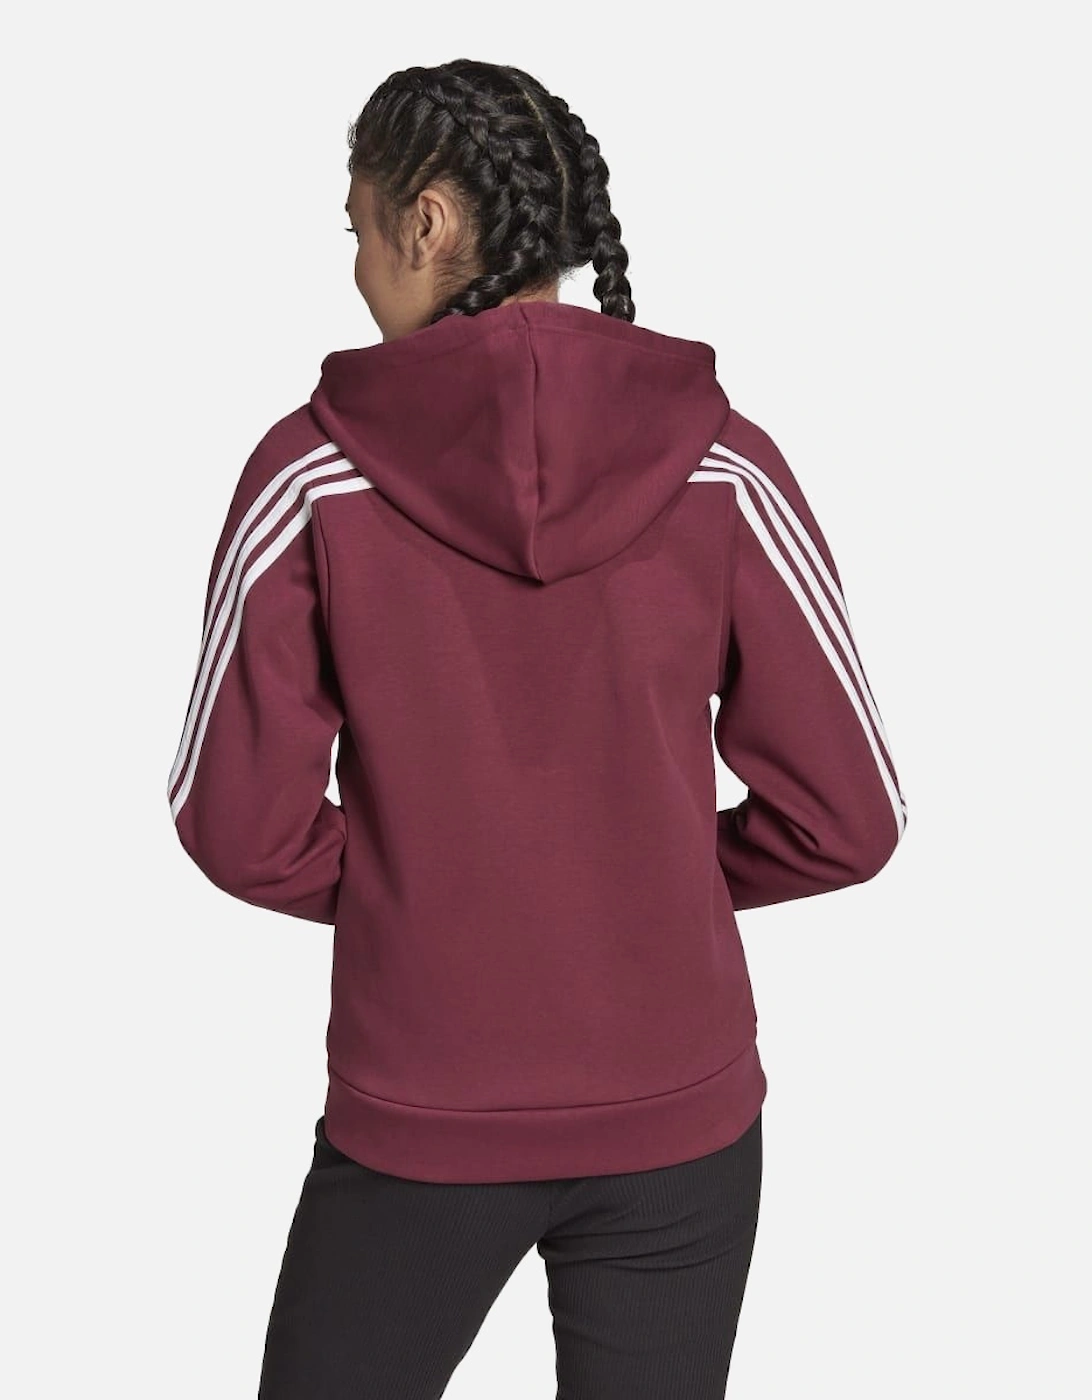 Womens Future Icons 3-Stripes Hooded Track Top